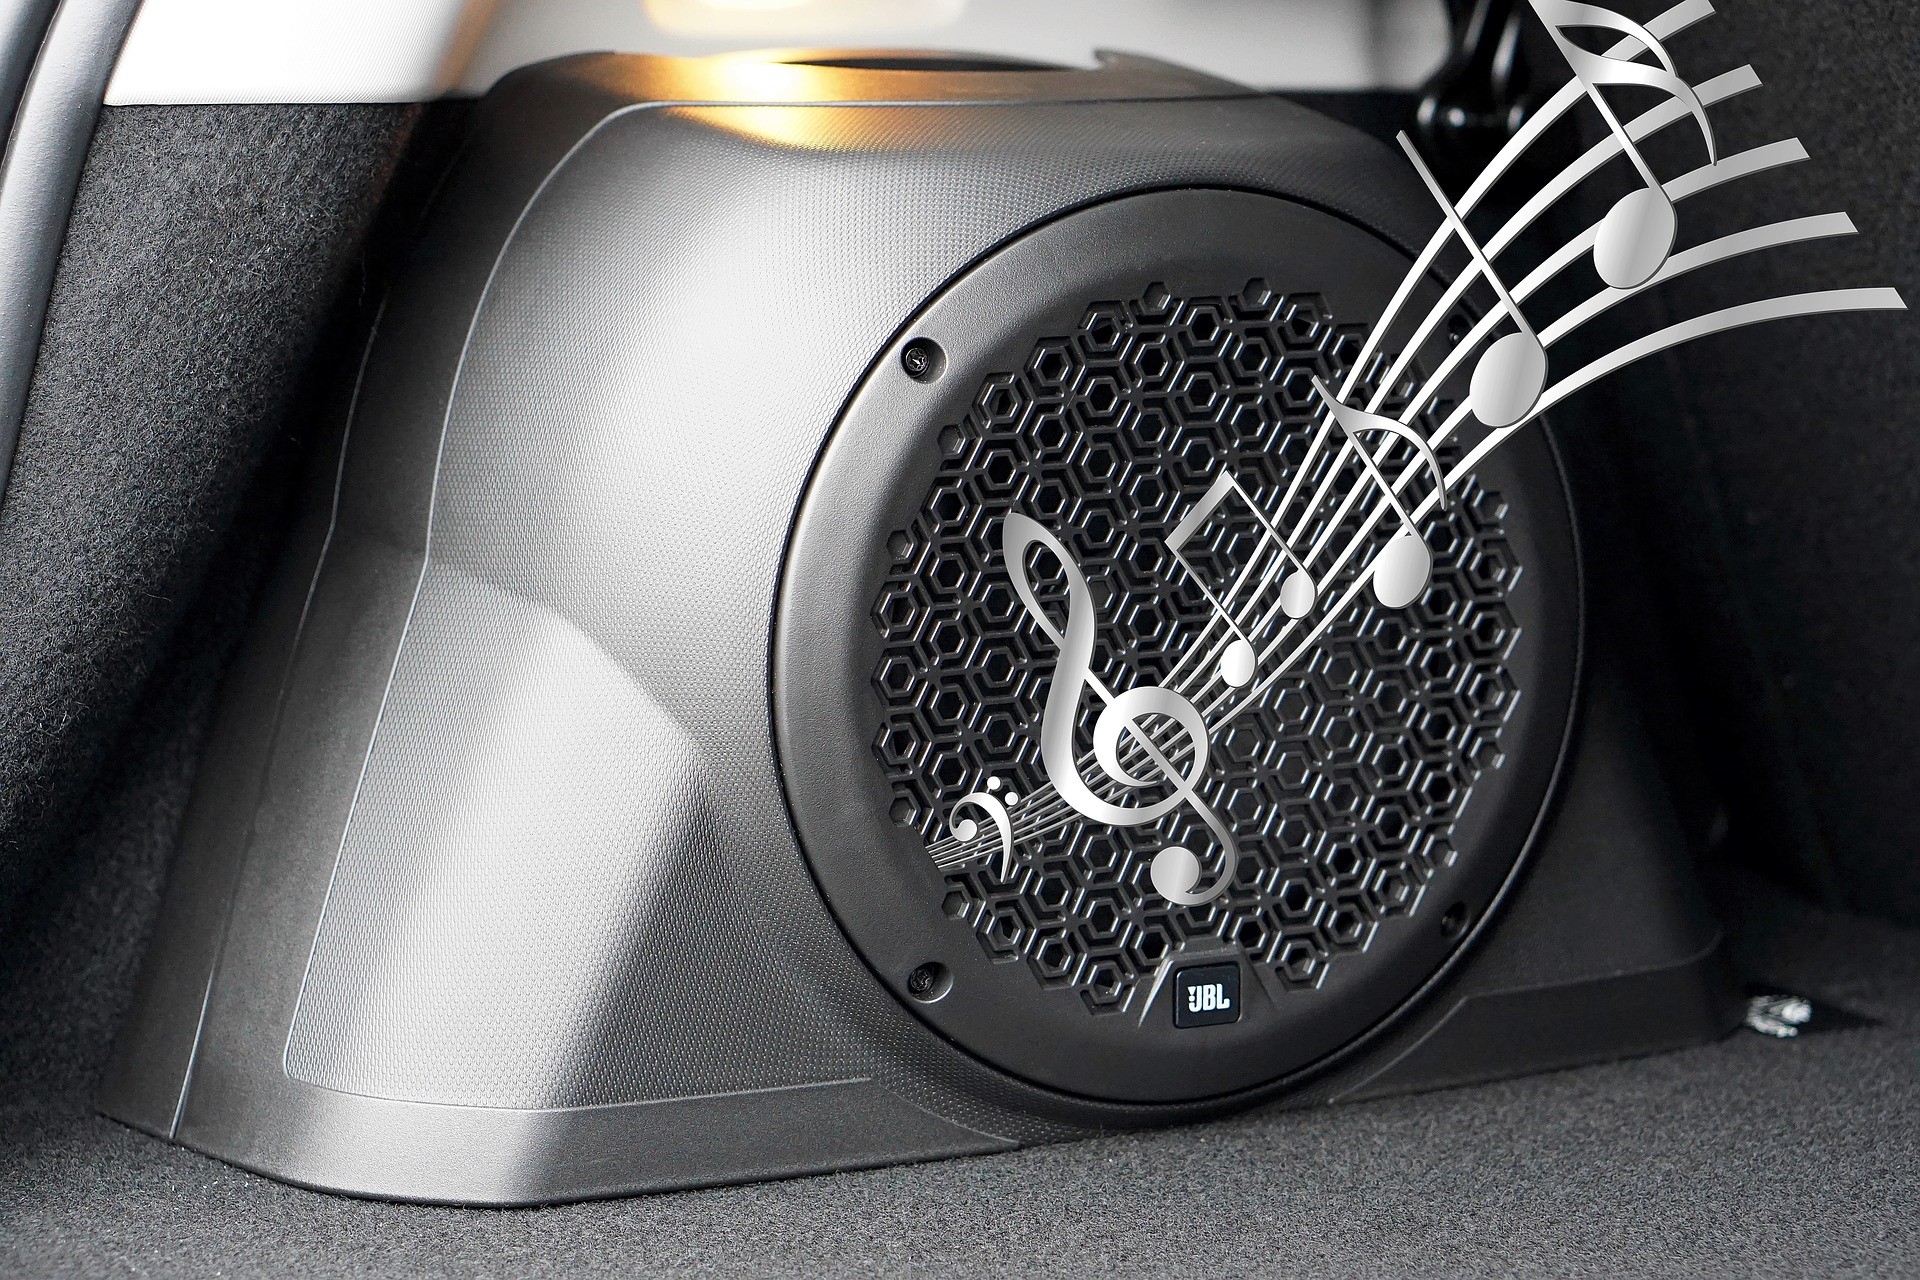 When Purchasing Speakers For Your Car? – 3 Awesome Tips